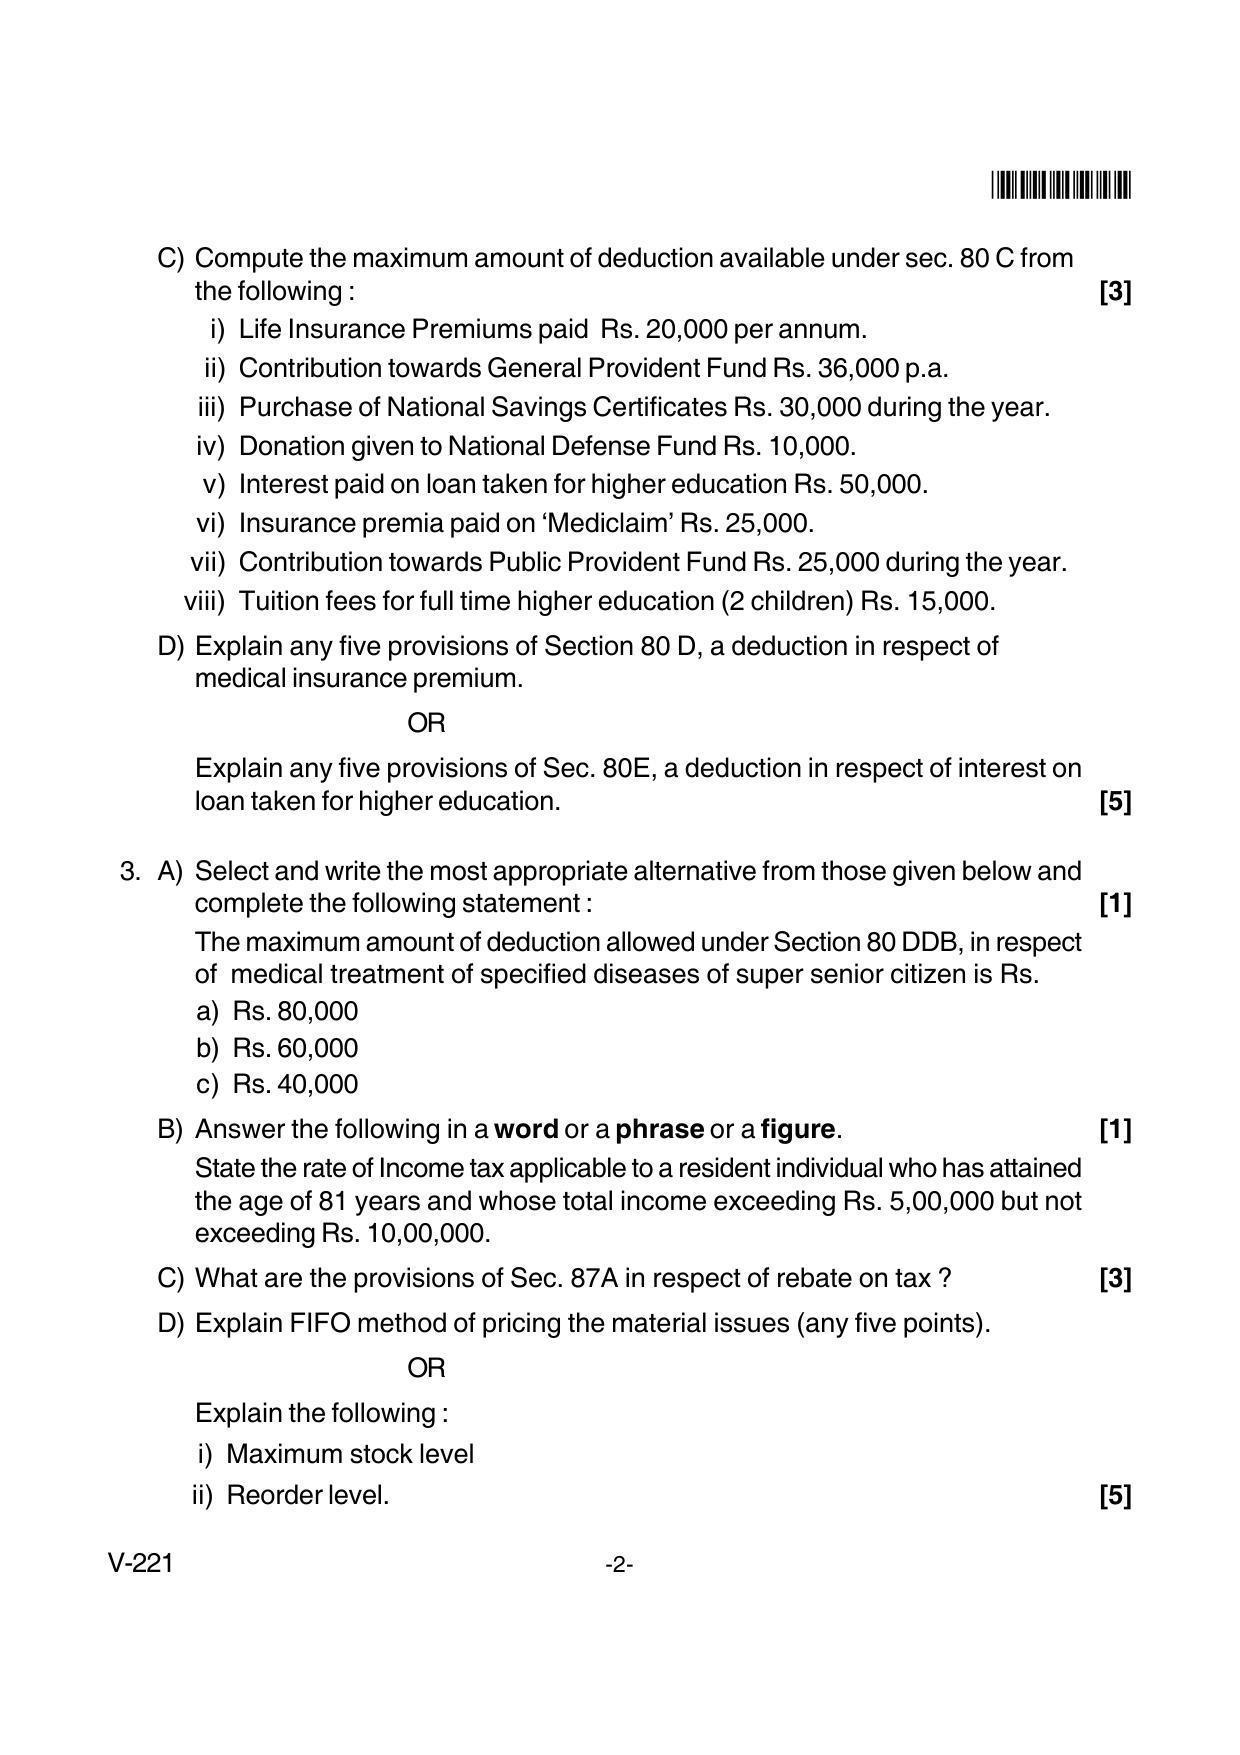 Goa Board Class 12 Cost Accounting & Taxation  Voc 221 (June 2018) Question Paper - Page 2